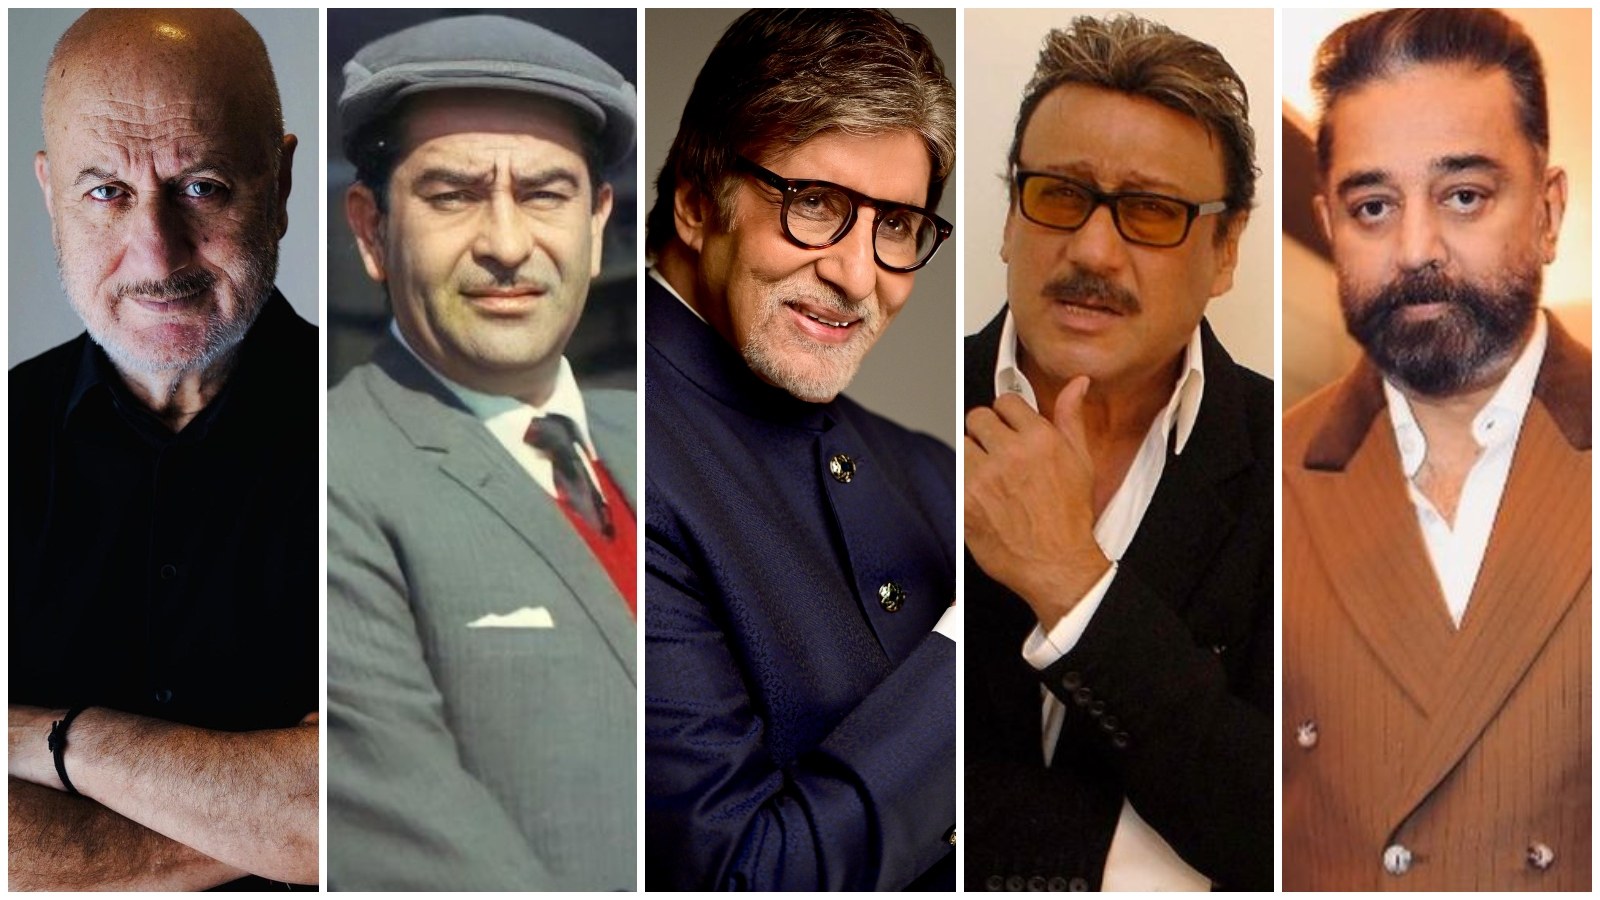 Anupam Kher, Raj Kapoor, Amitabh Bachchan, Jackie Shroff and Kamal Haasan know the highs and lows of the film business more than most. Photos: @anupampkher, @rajkapoorsahab, @SrBachchan, @jackie_shroff20, @ikamalhaasan/Instagram